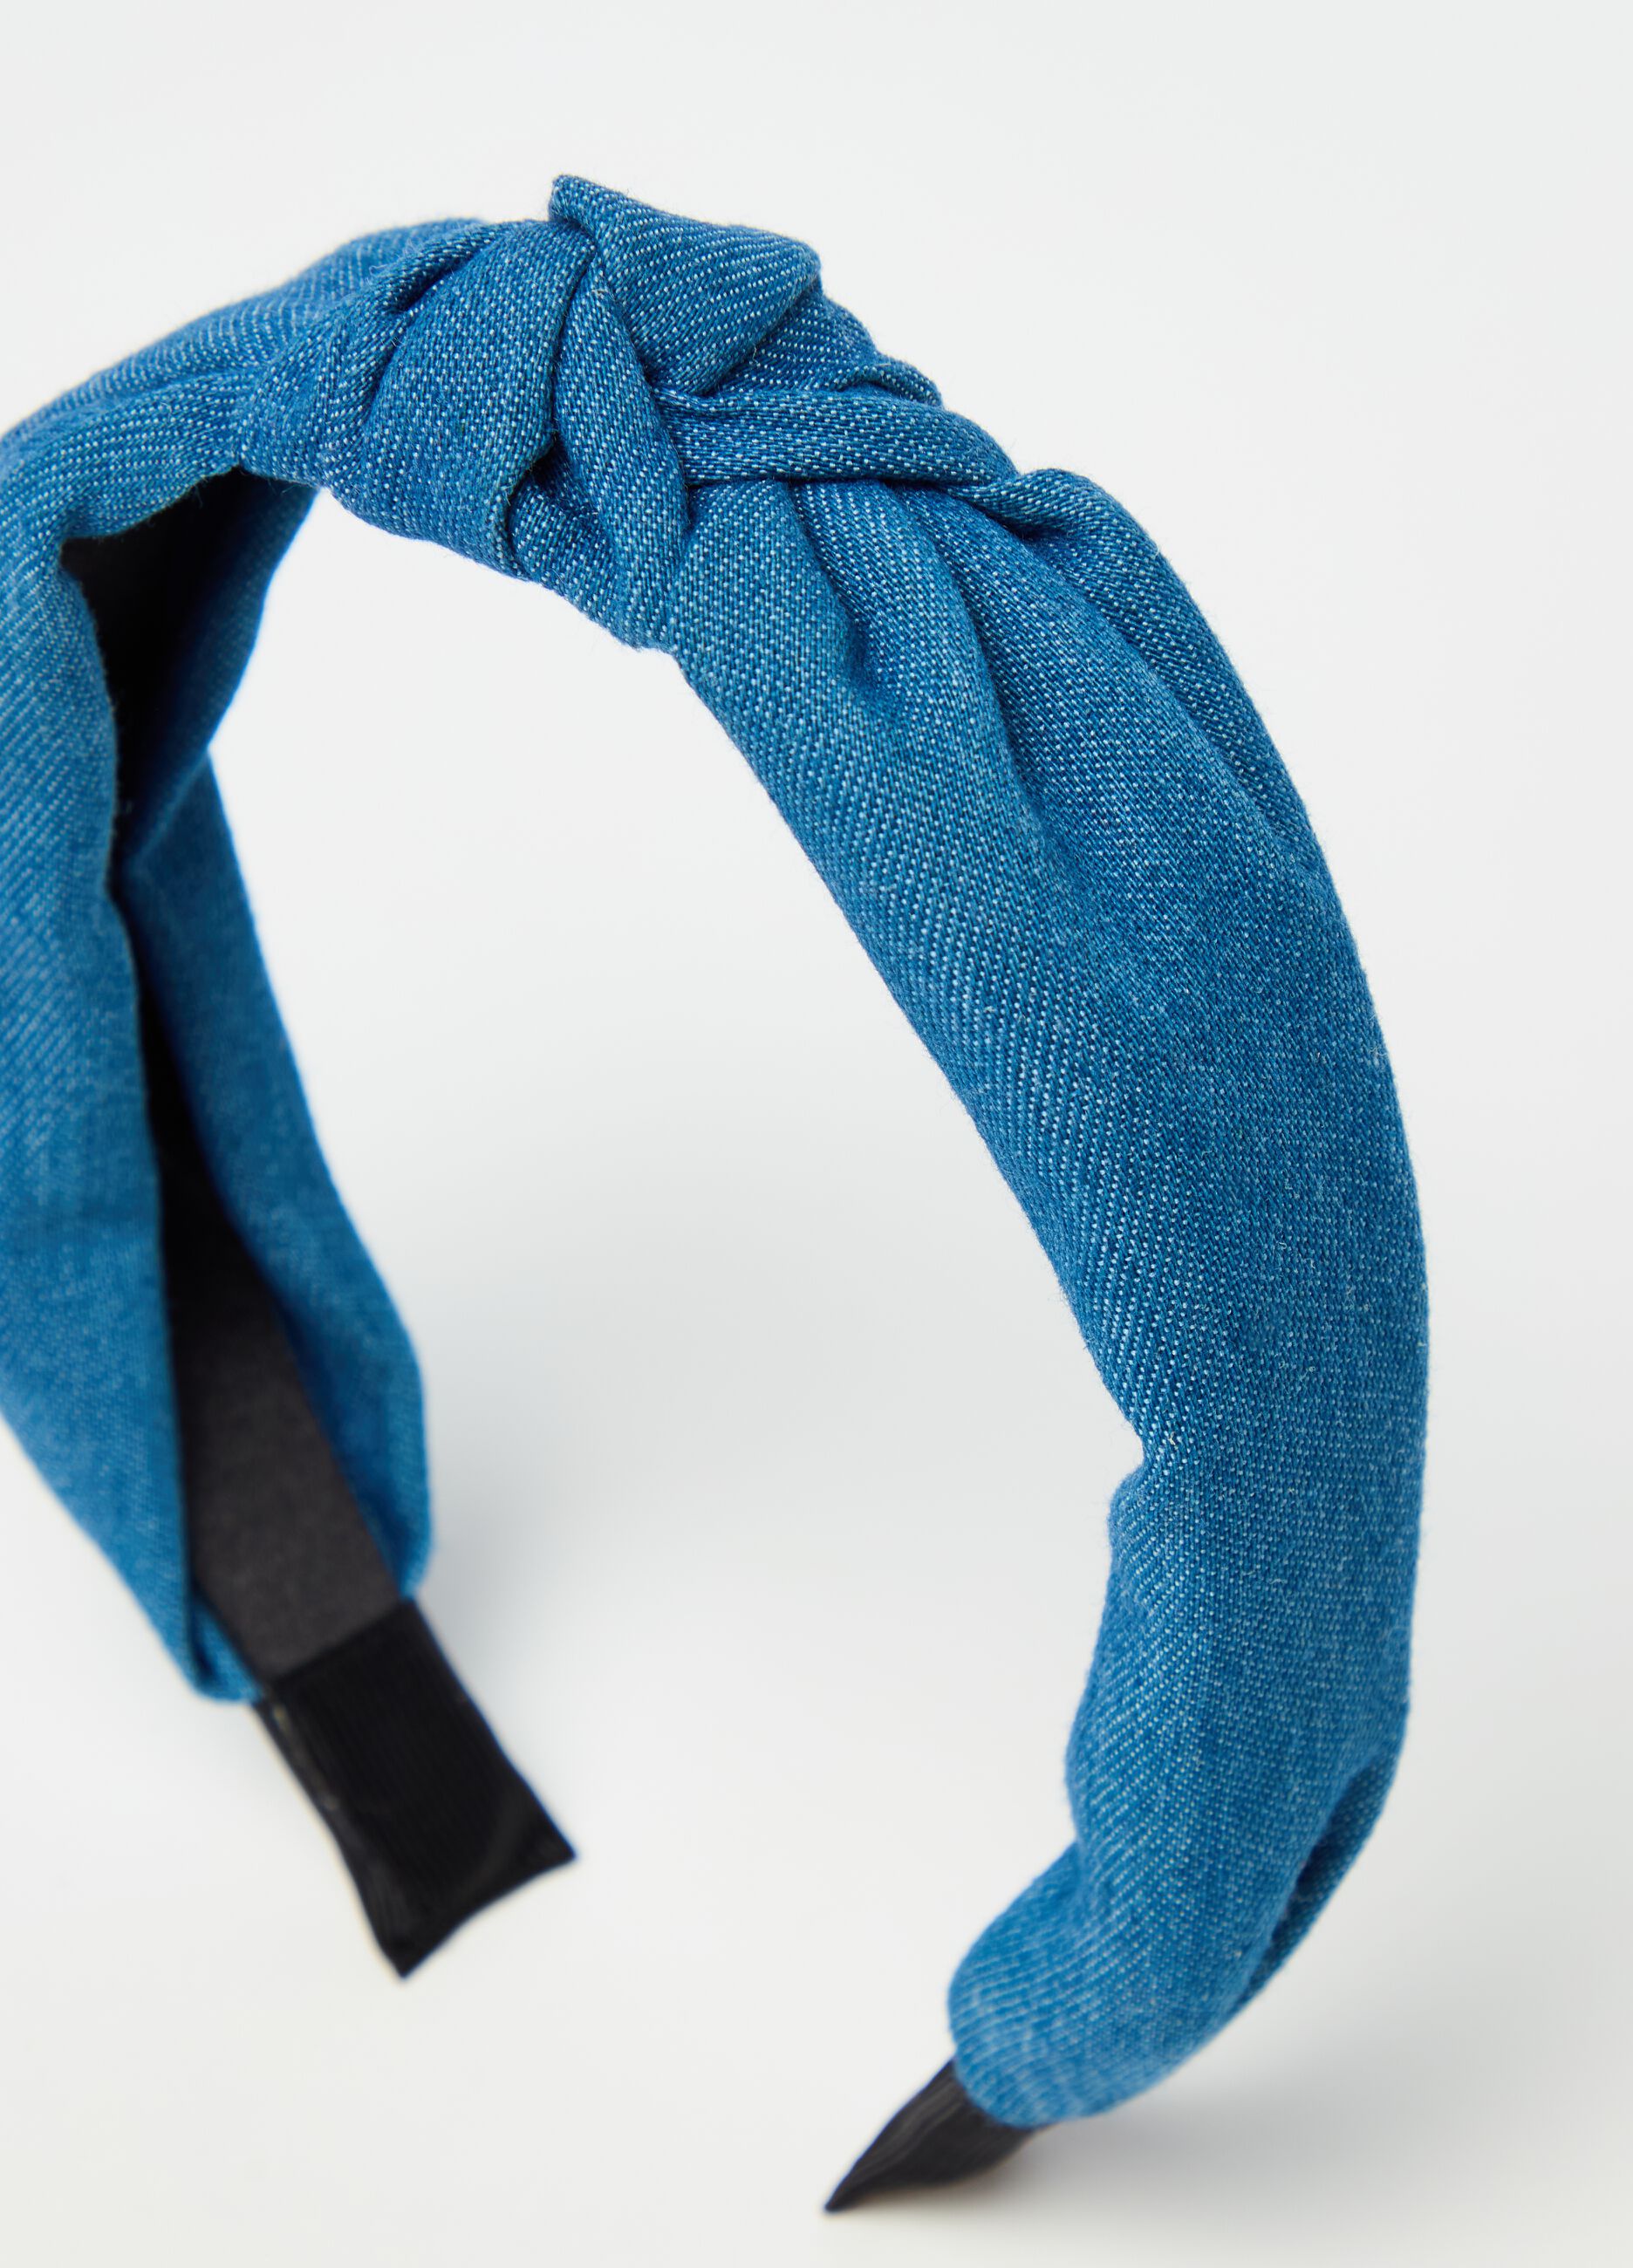 Alice band in denim with knot